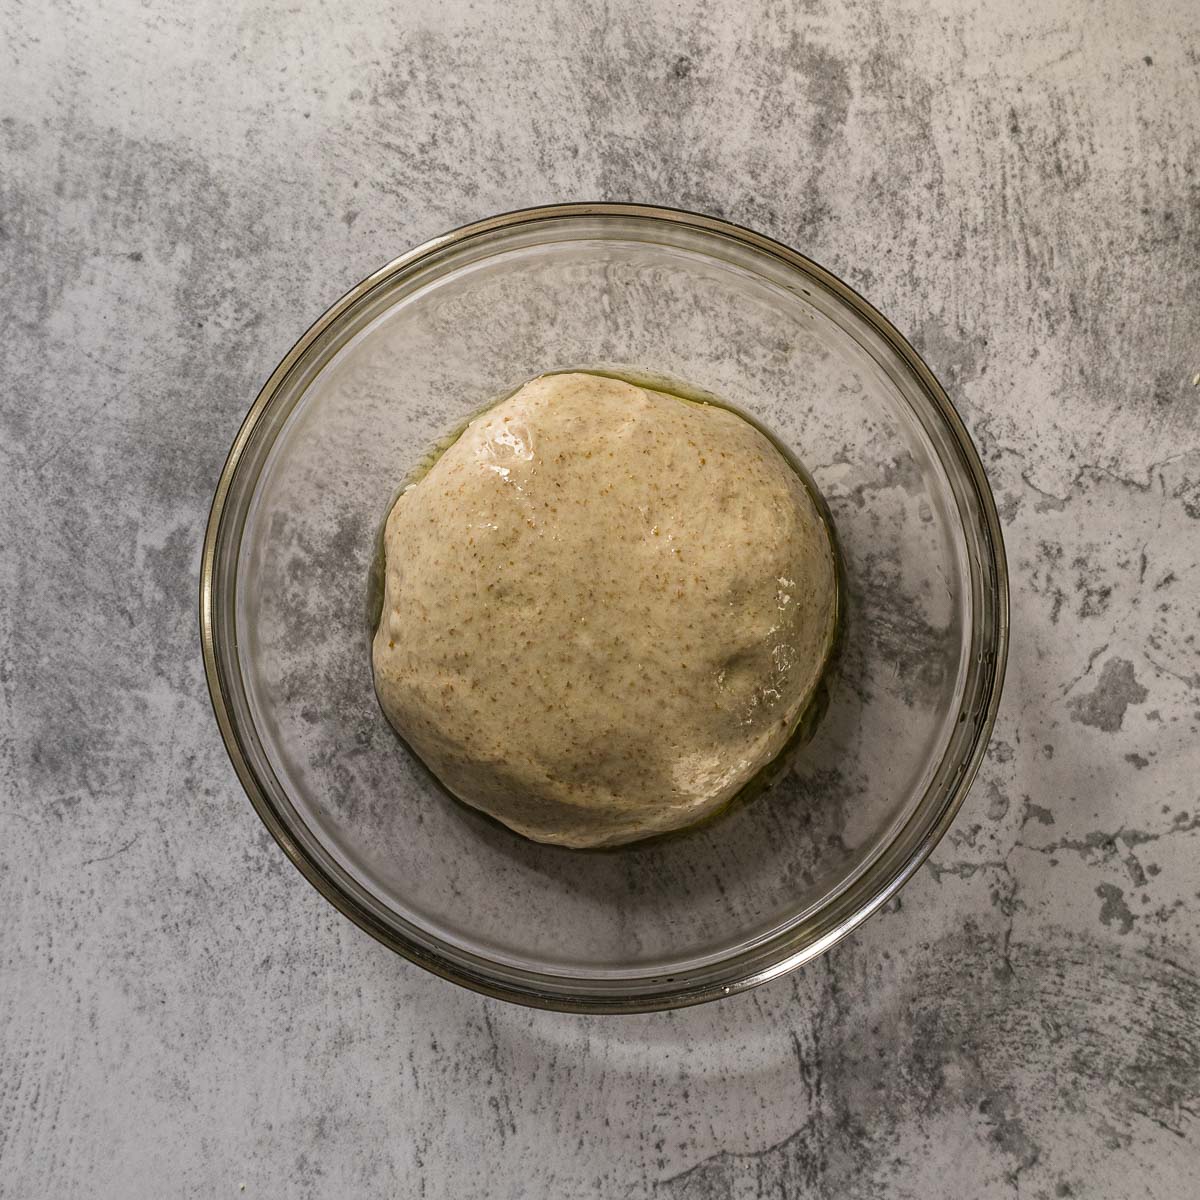 kneaded bread dough in a bowl with oil